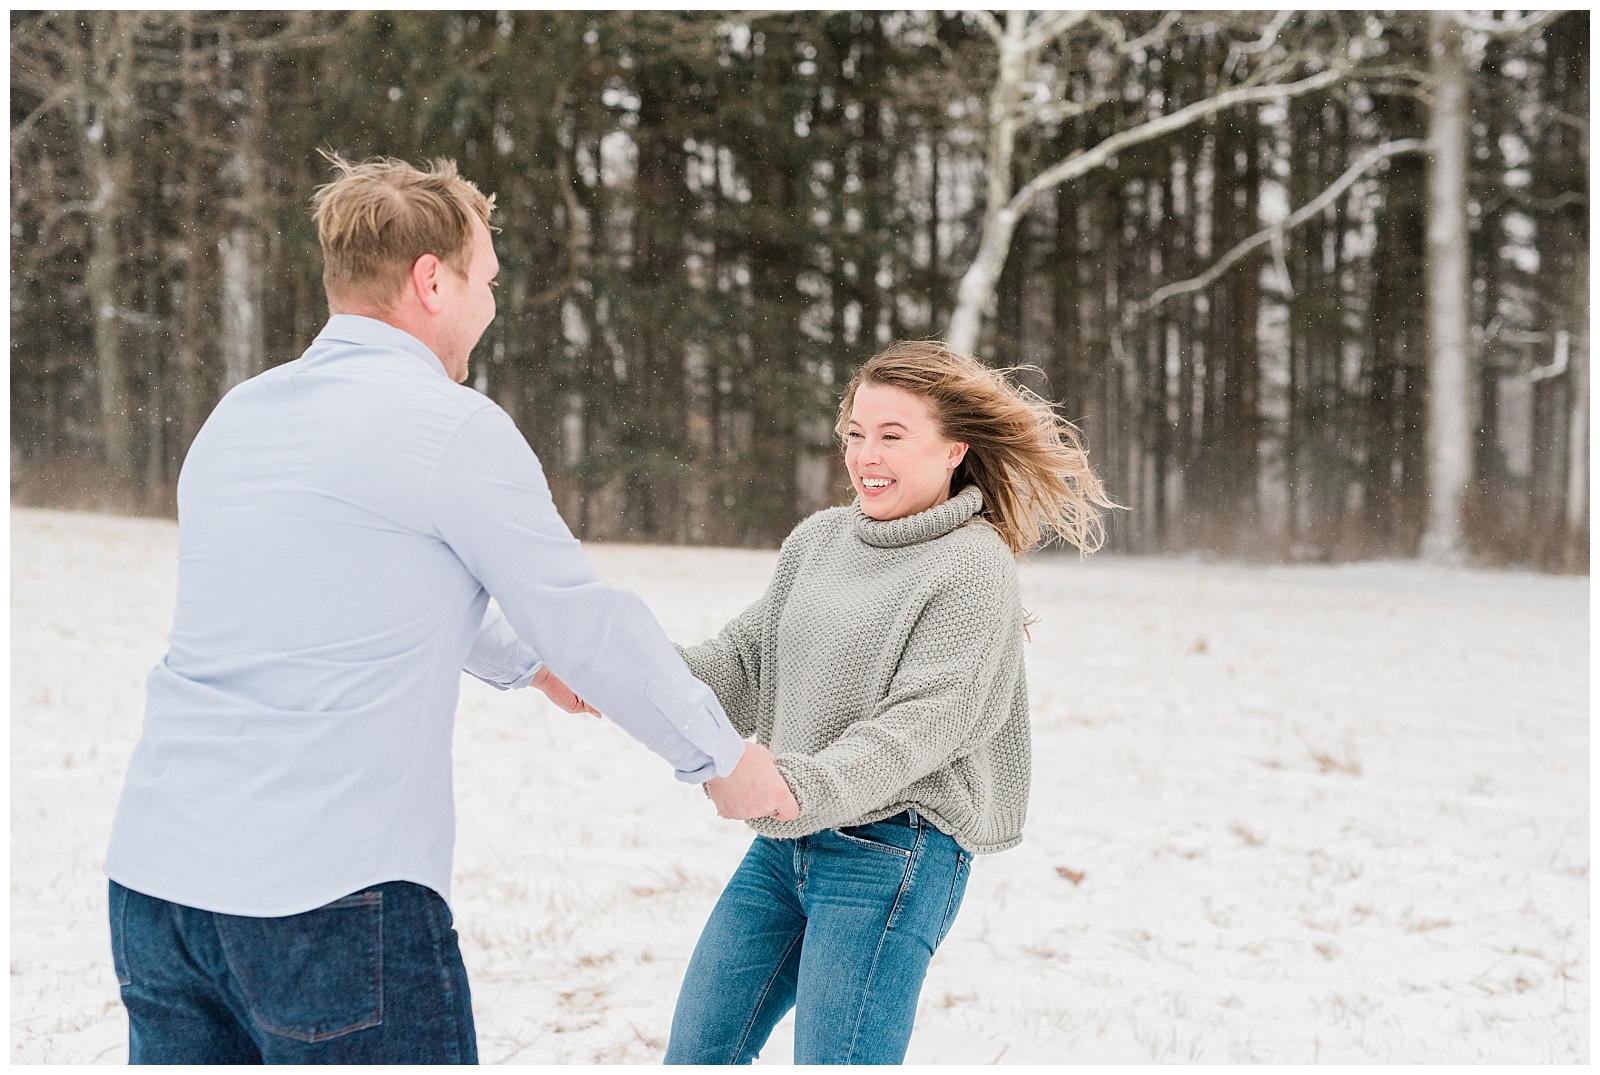 New Jersey Engagement Session, Snowy, Winter, Cozy, Session, Wedding Photographer, Cross Estate Gardens, Snow, Wintry, Light and Airy, Spin, Fun